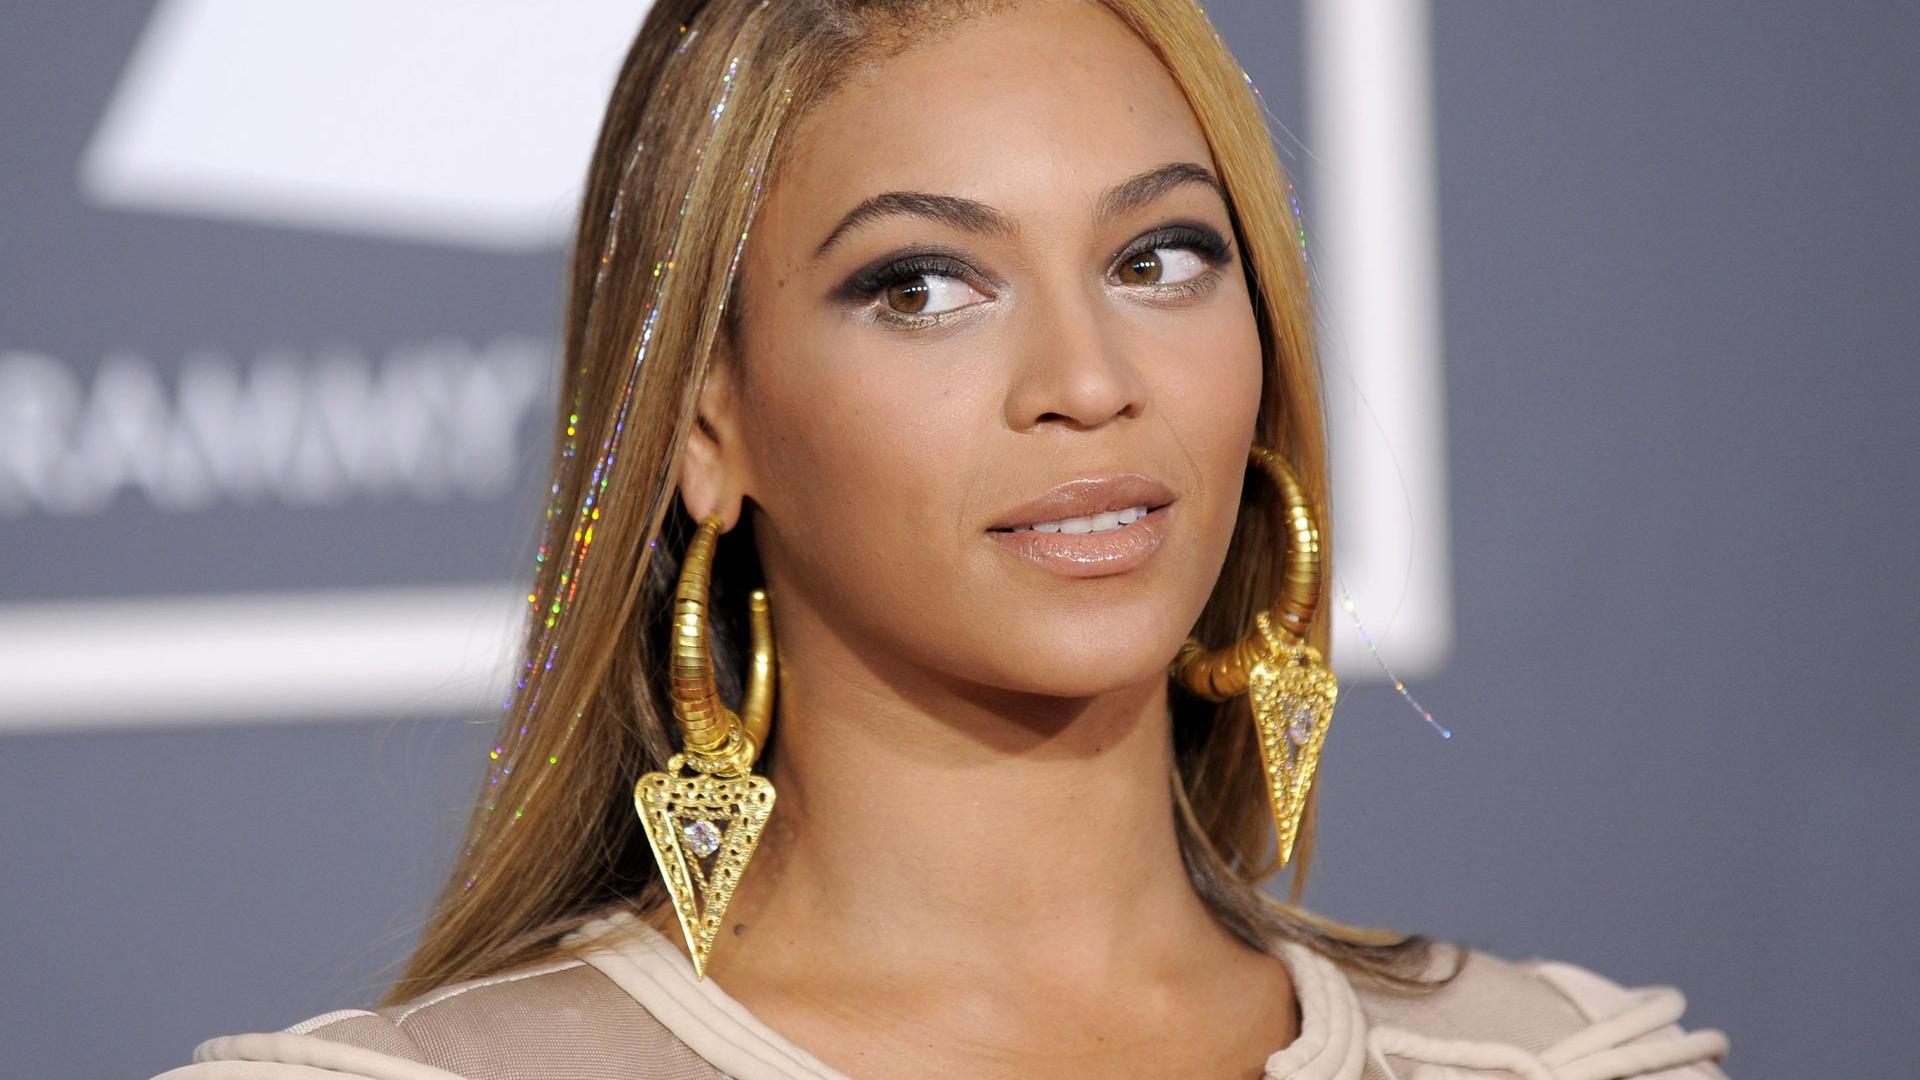 Beyonce Knowles Grammy Awards 2013 HD Wallpaper of Celebrities